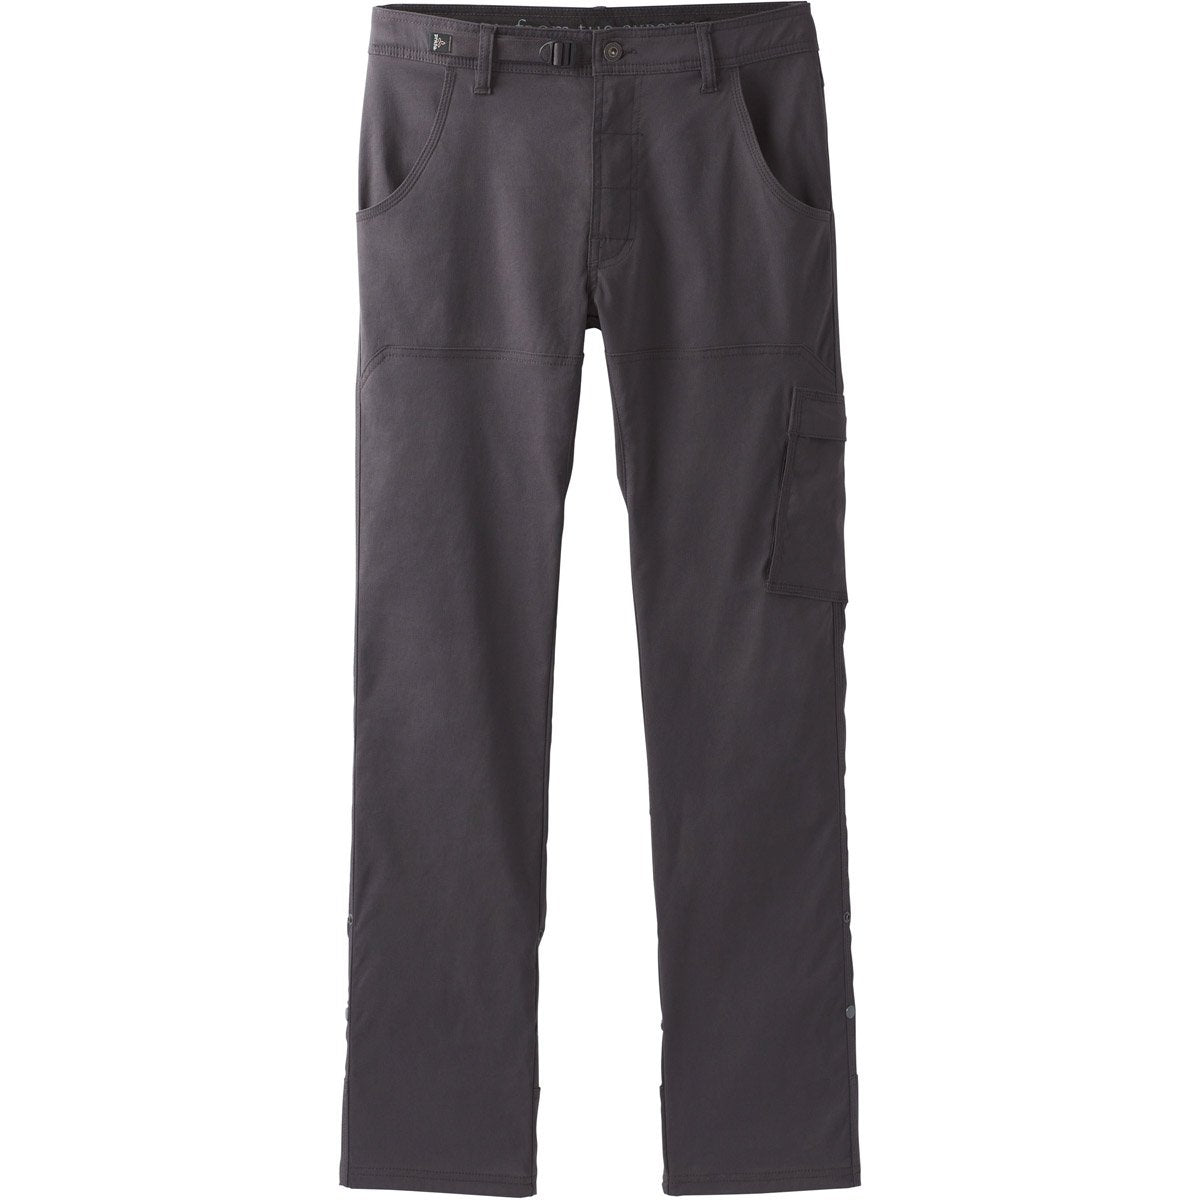 Men's Stretch Zion Straight - 32 Inseam - Gearhead Outfitters